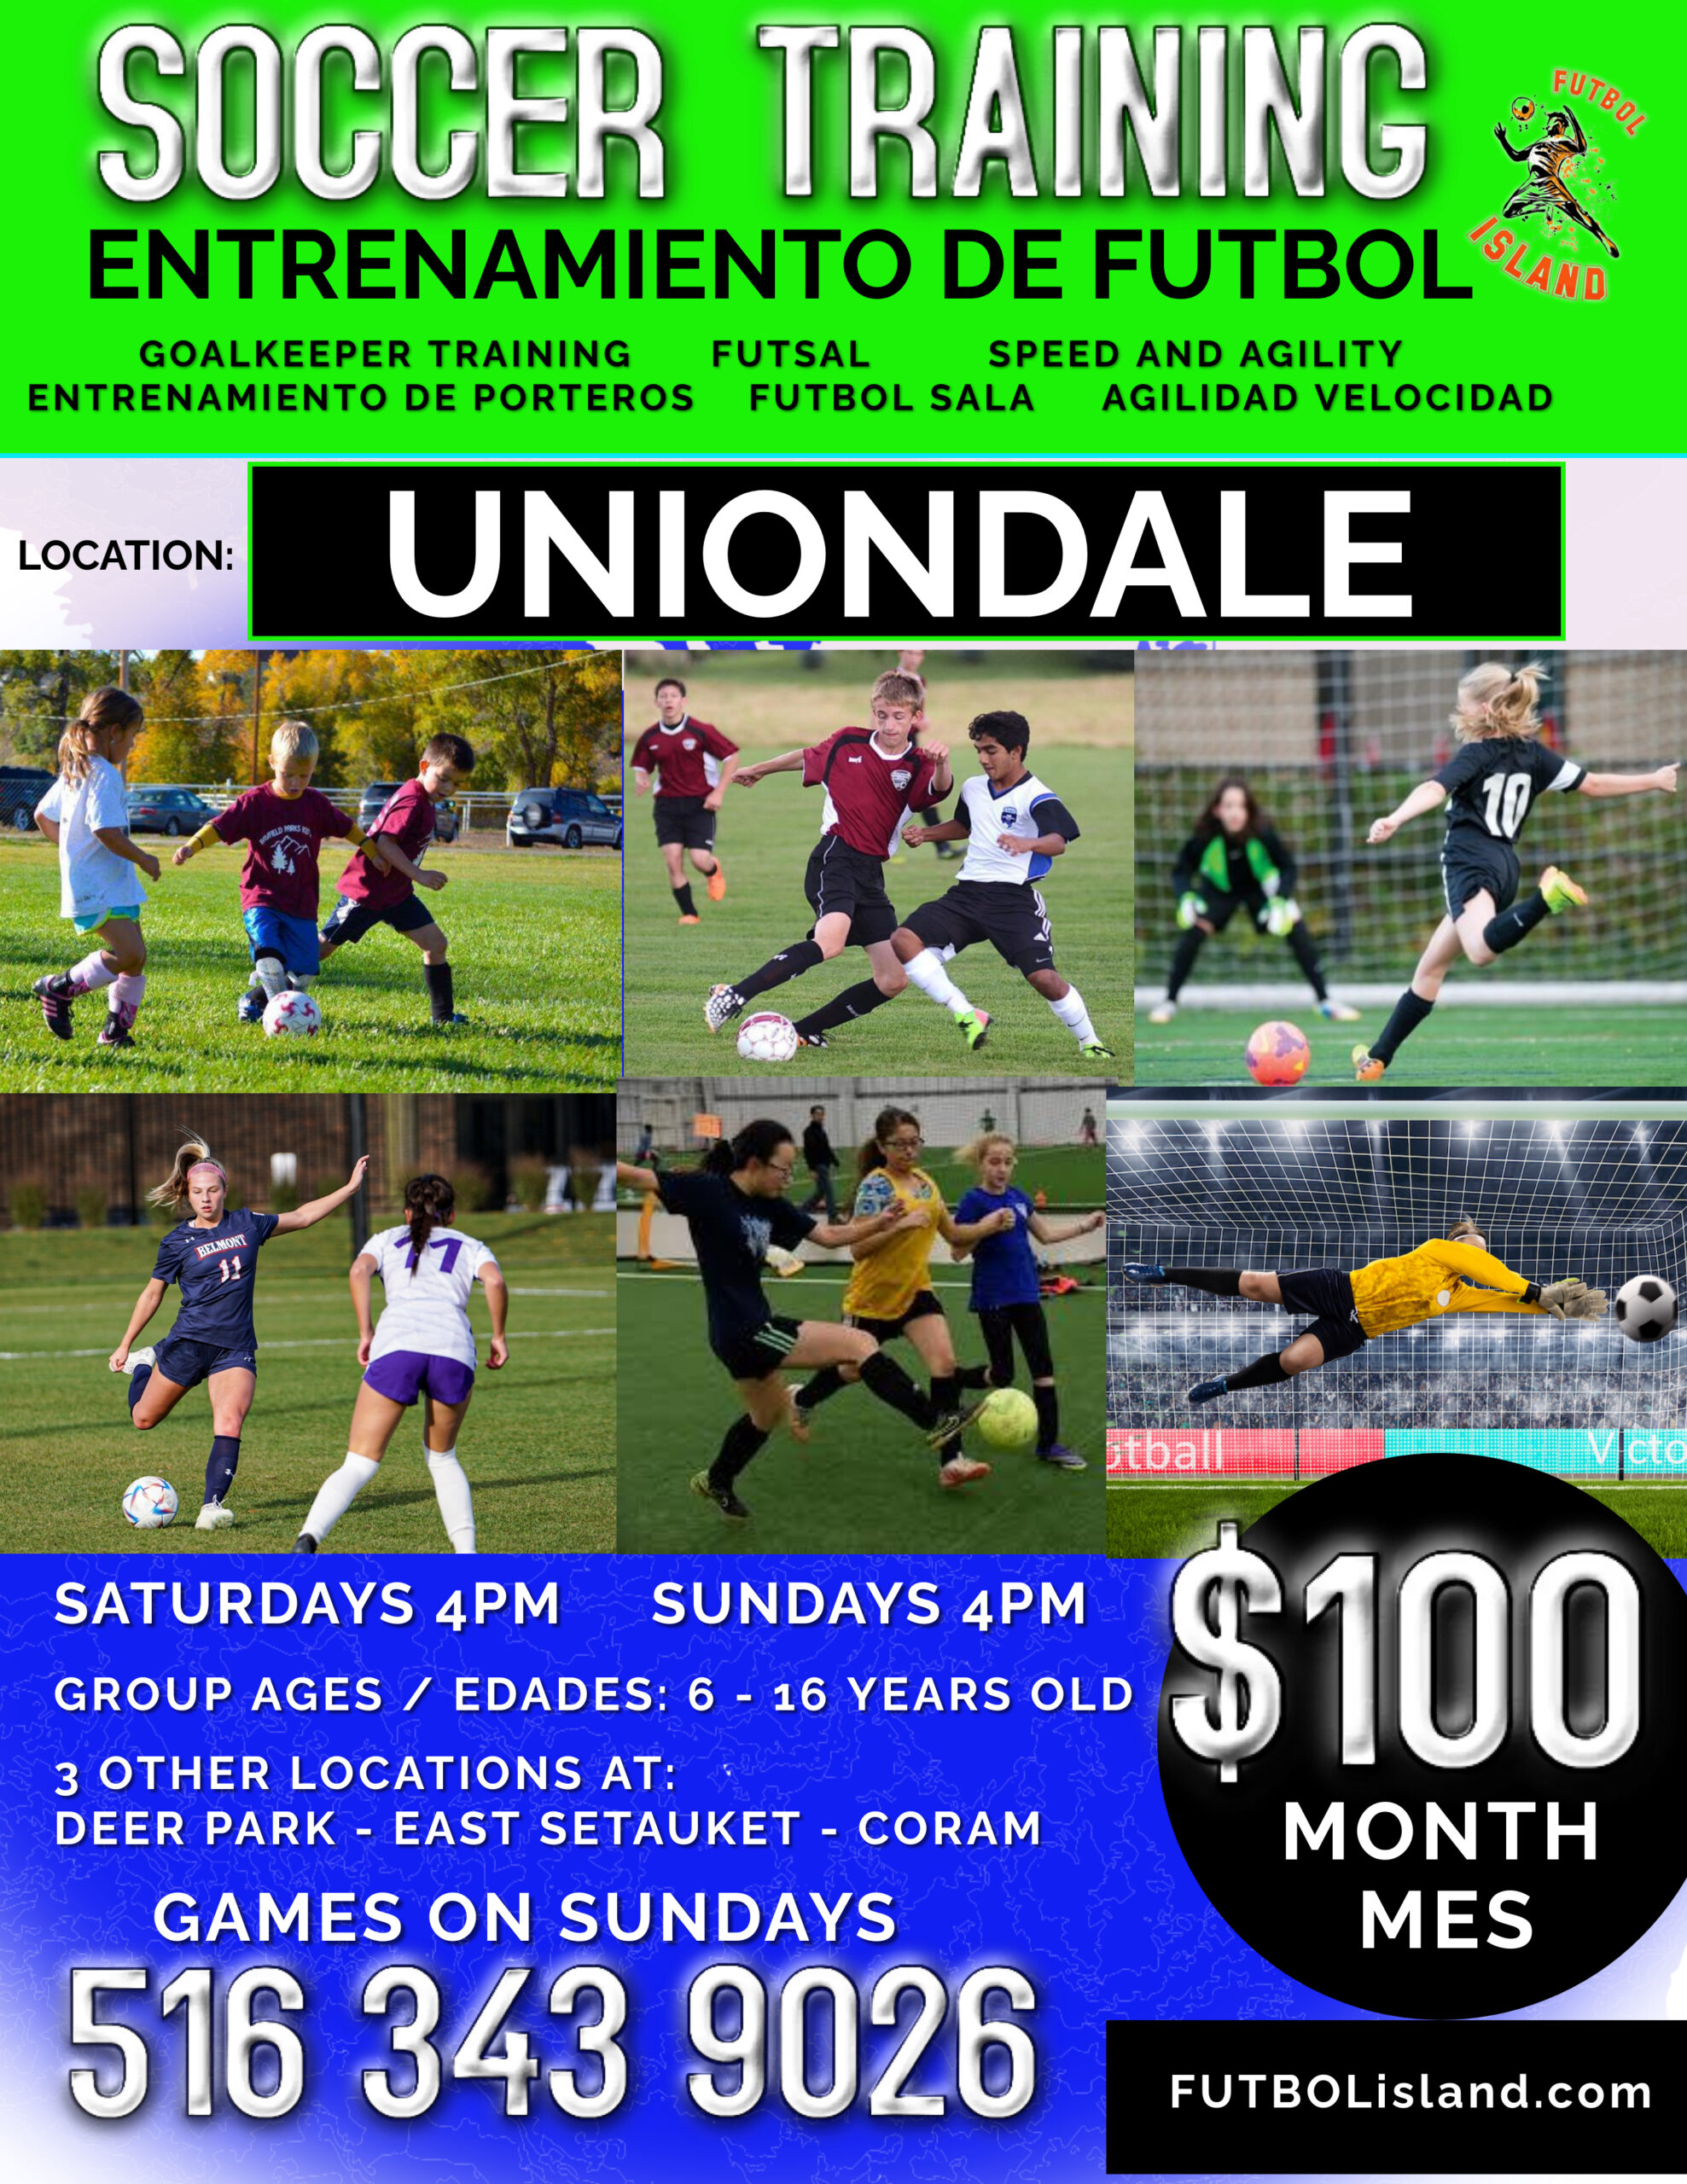 SOCCER ACADEMY UNIONDALE